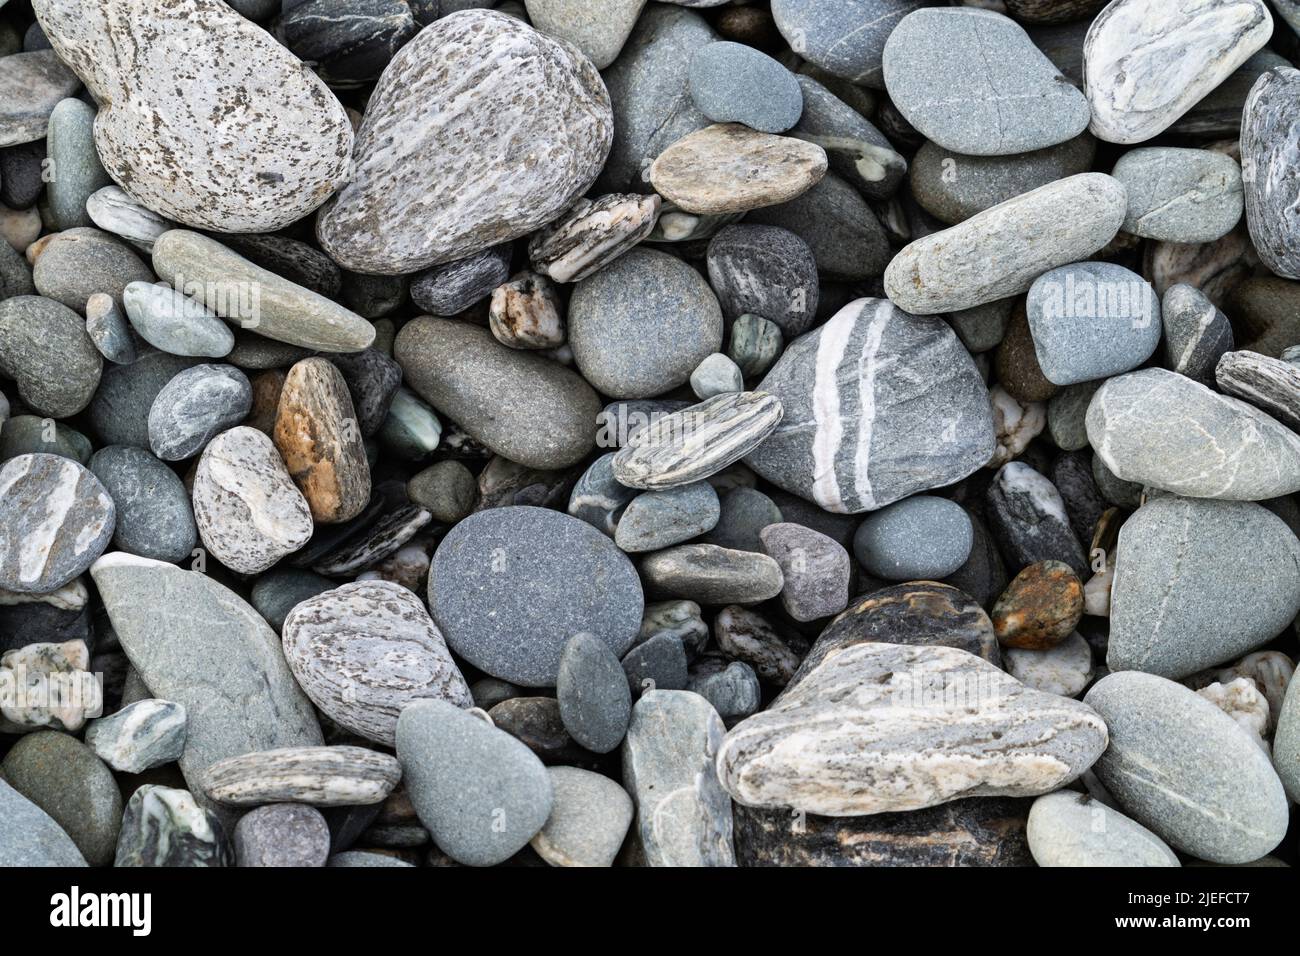 River stones in typical random pattern and type in New Zealand. Stock Photo